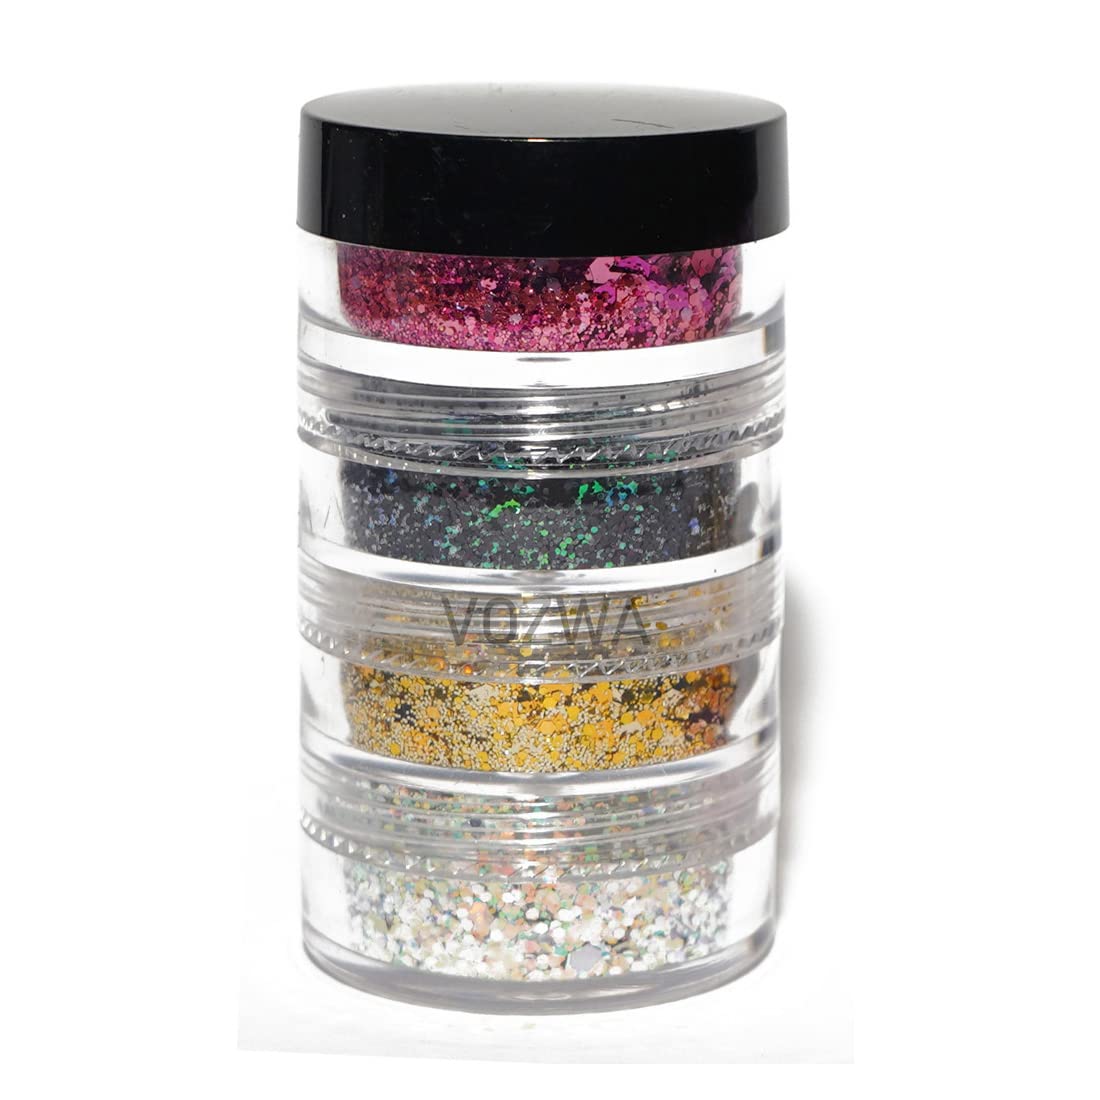 Vozwa 4 in 1 Eyeshadow Chunky and Fine Glitter Mix - (Pink + Black + Golden + Silver)